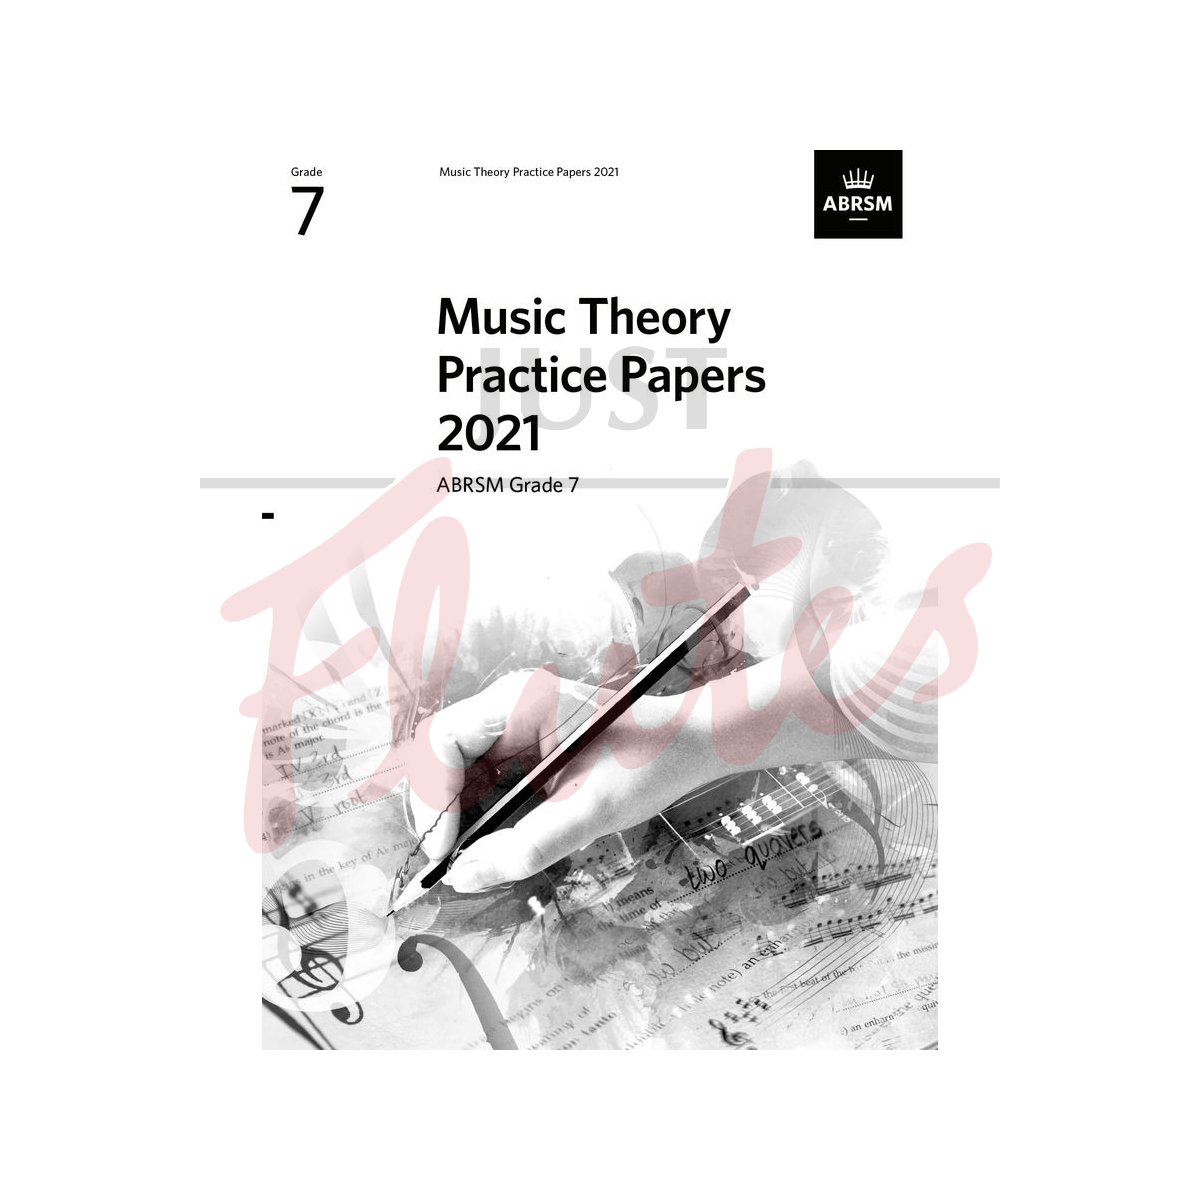 Music Theory Practice Papers 2021 Grade 7